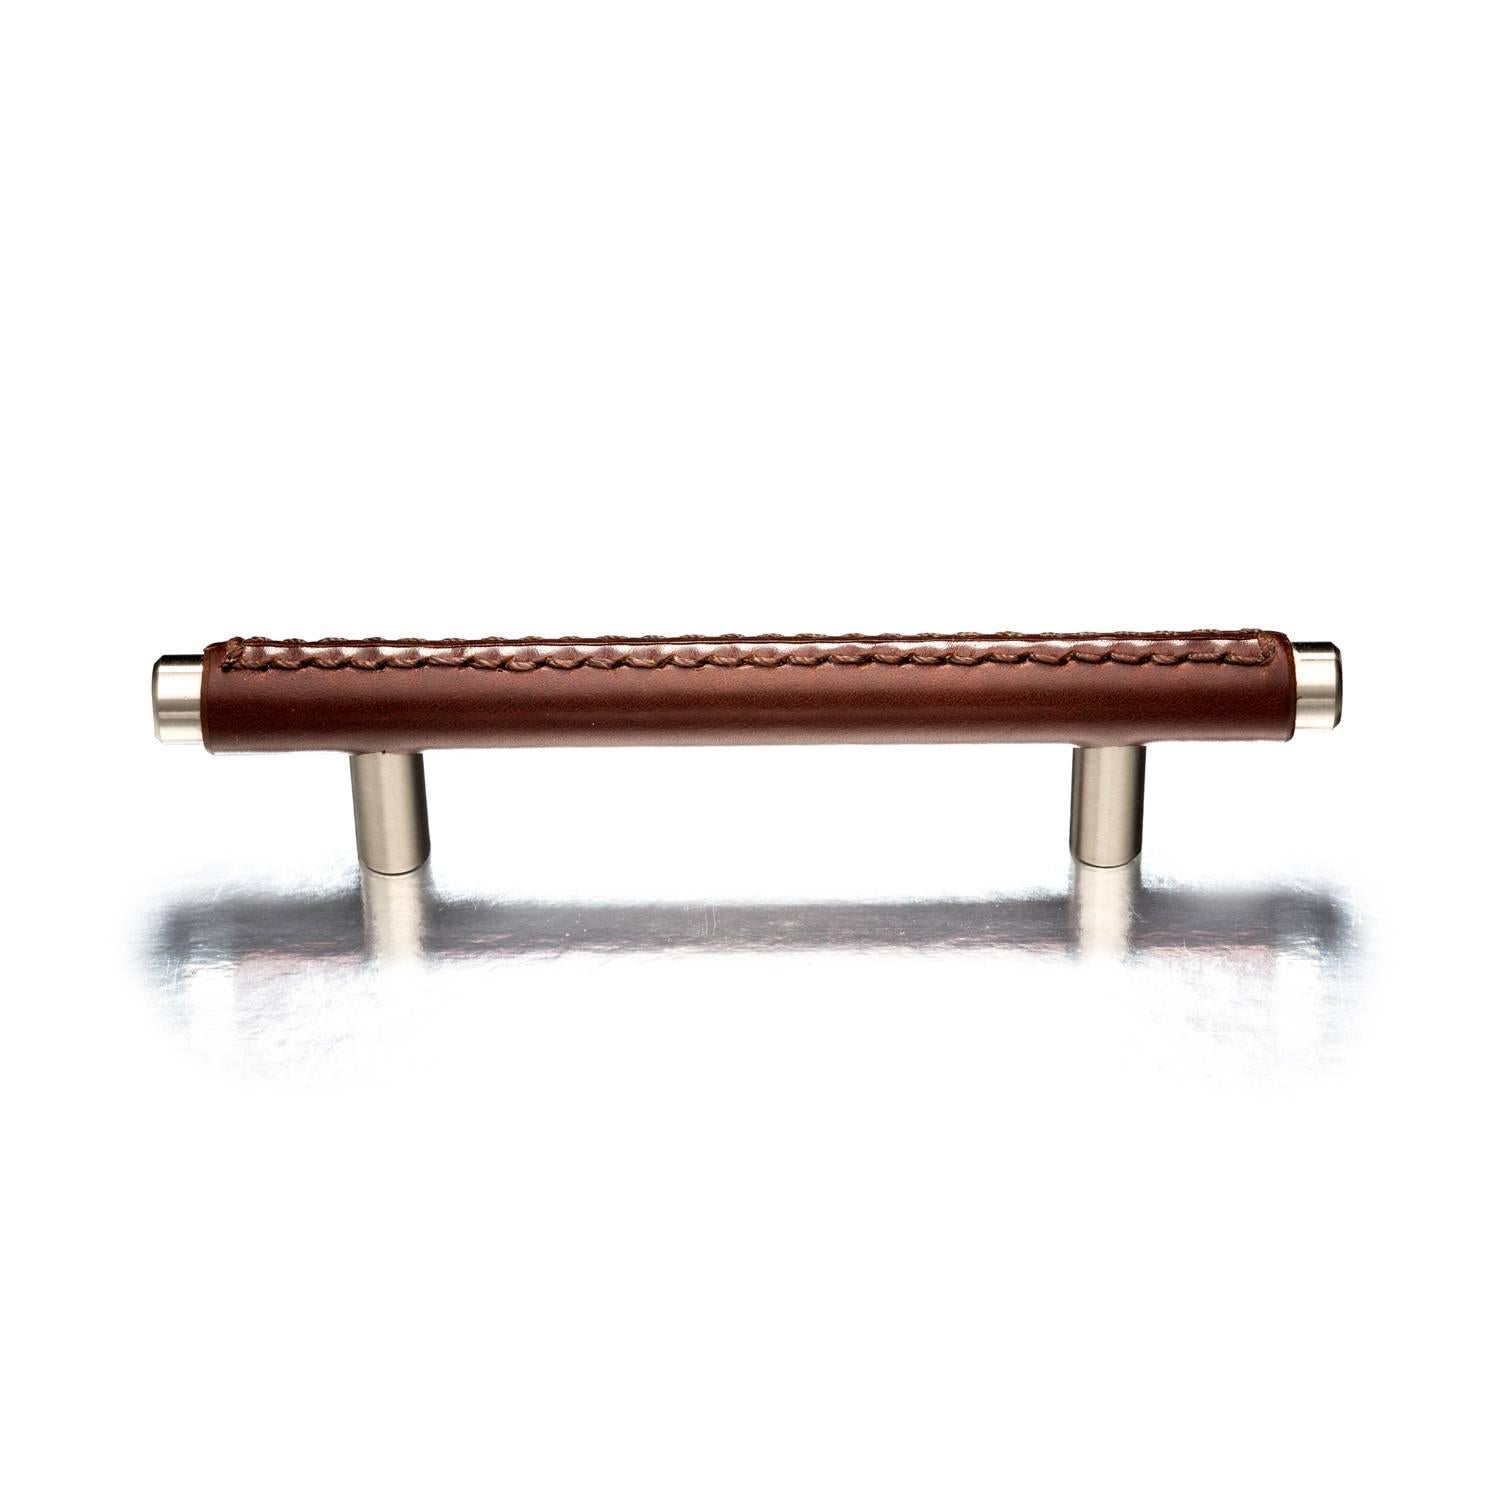 Hand-stitched leather T-bar cabinet pull, featuring traditional saddle stitch. Available in various metal finishes and sizes.